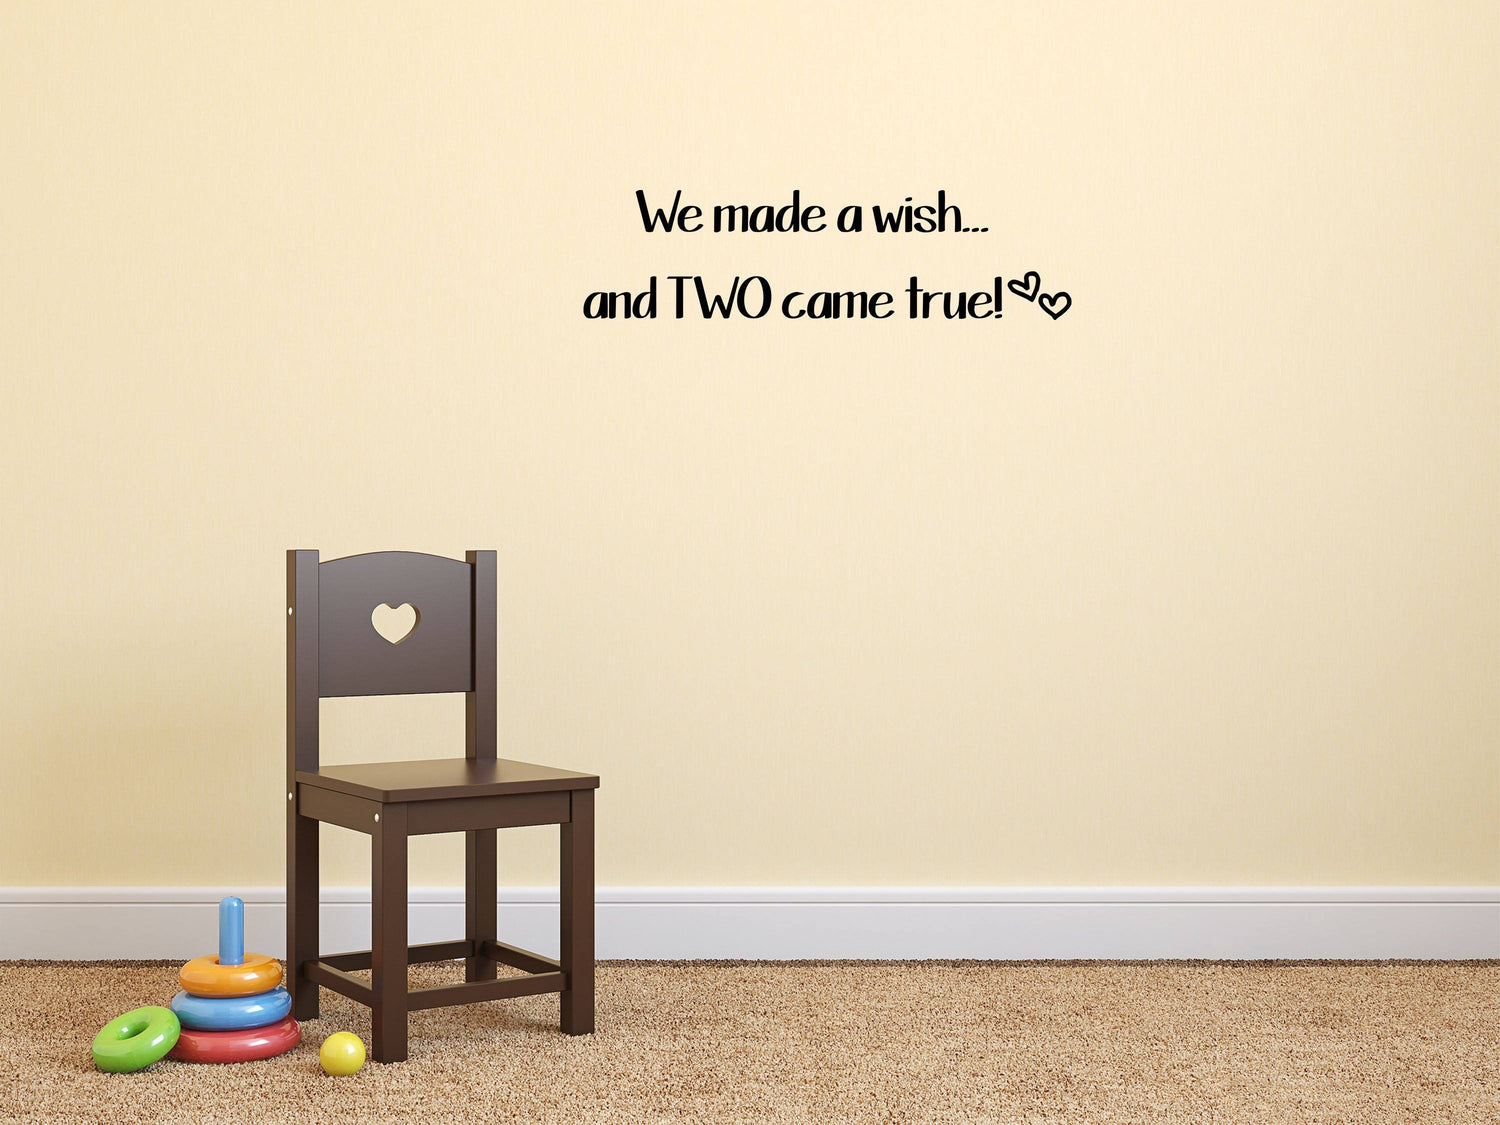 We Made A Wish and Two Came True - Inspirational Wall Decals Vinyl Wall Decal Inspirational Wall Signs 